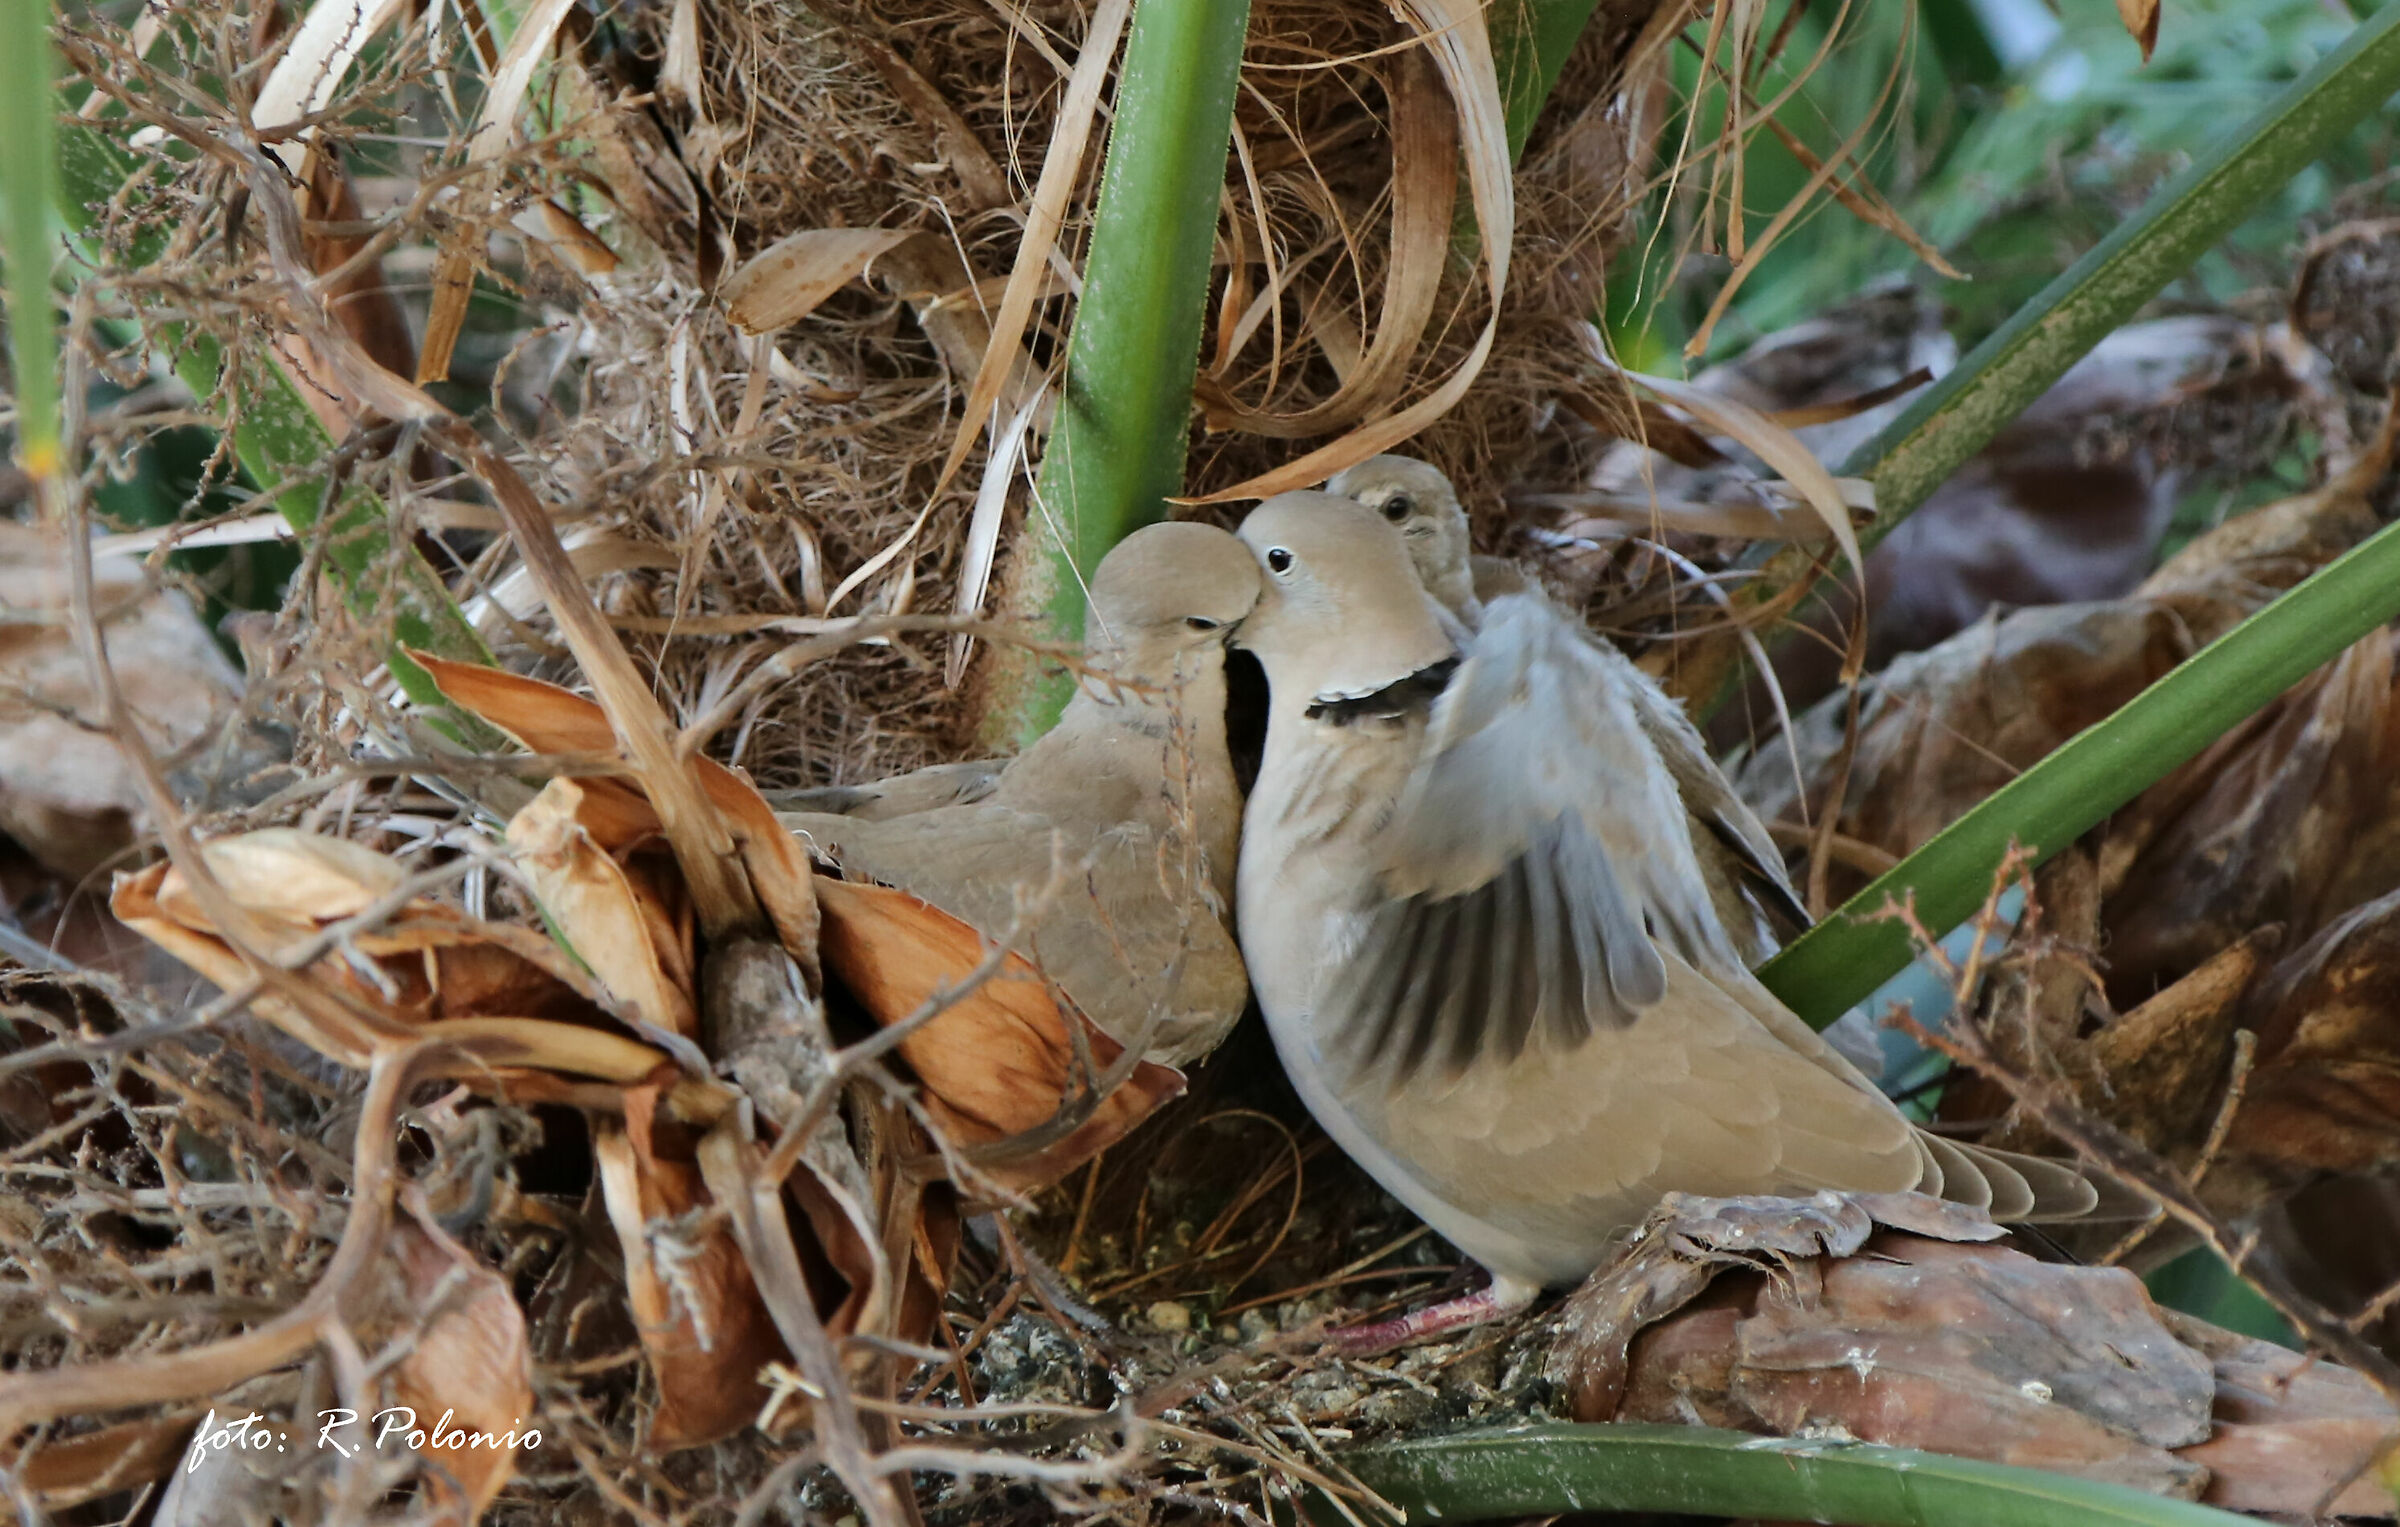 The "feeding" of a dove mother....